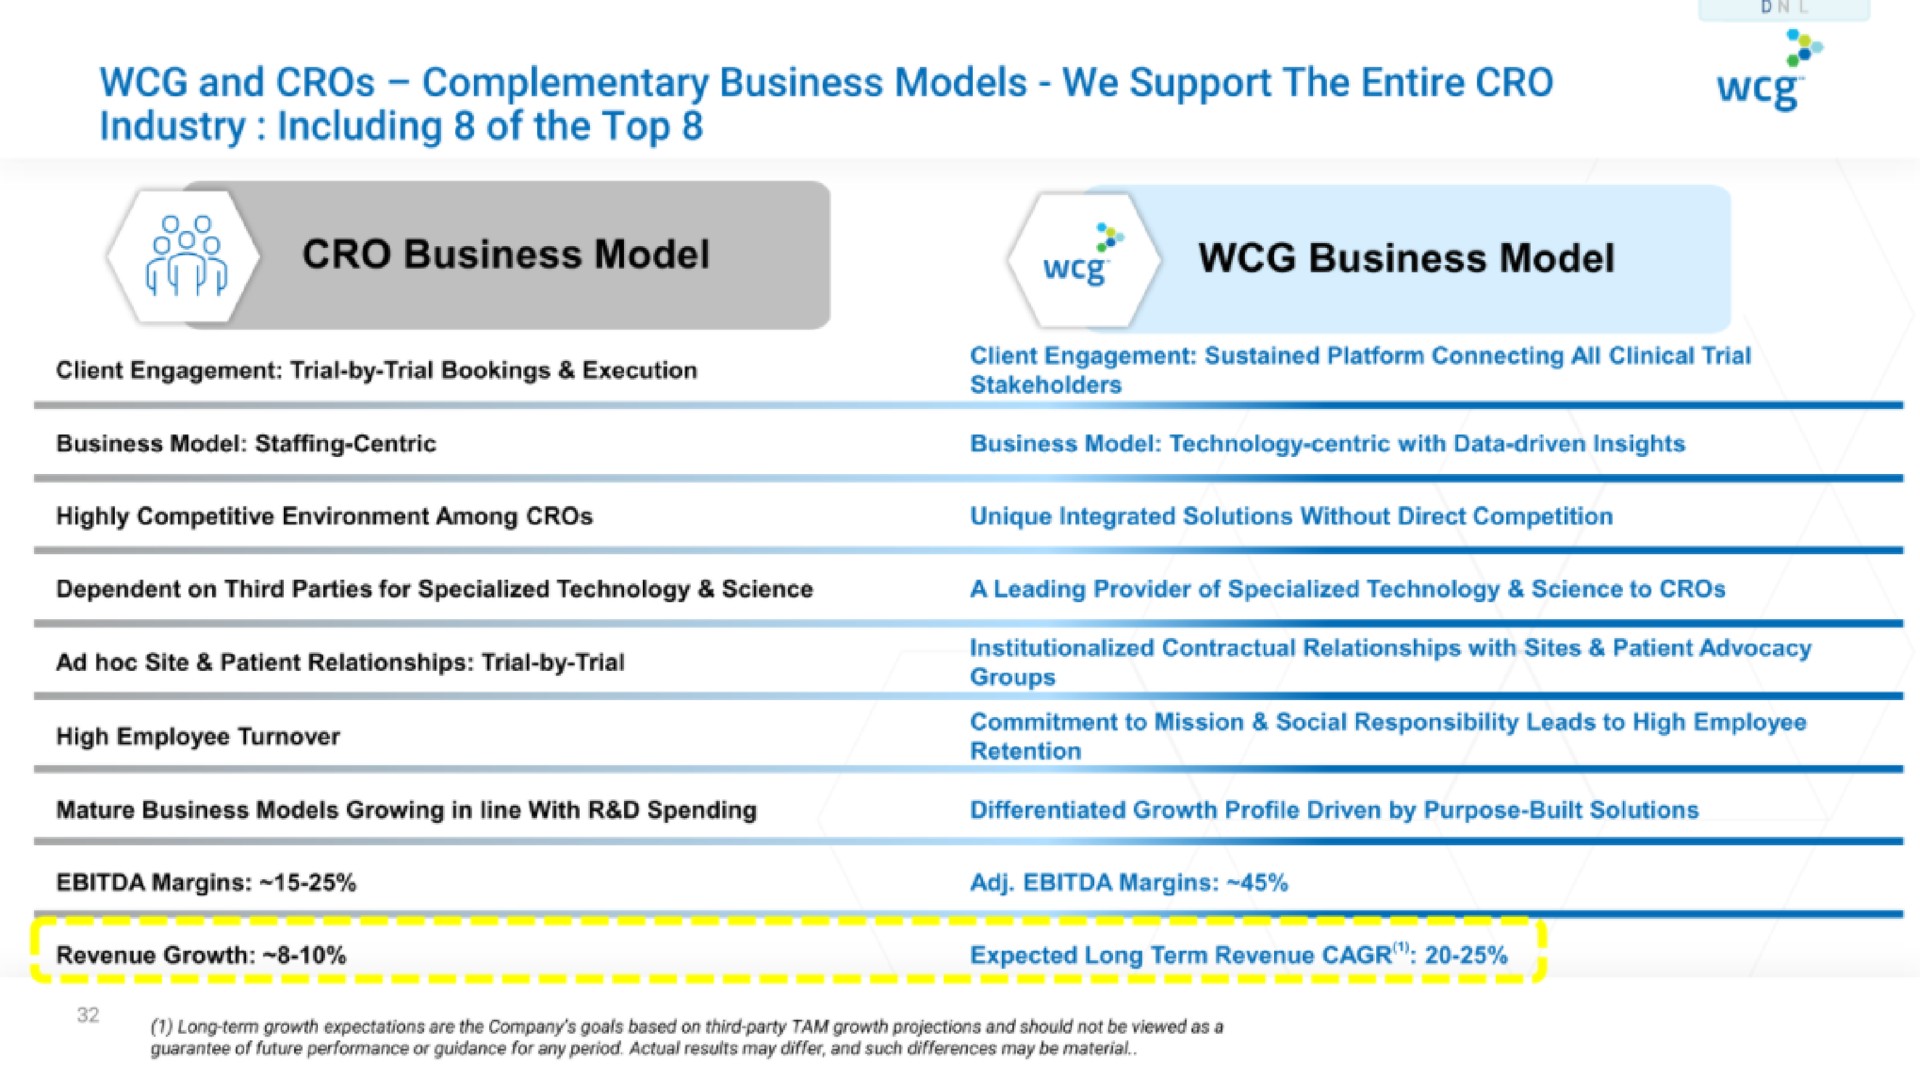 and cros complementary business models we support the entire cro cro business model business model | WCG